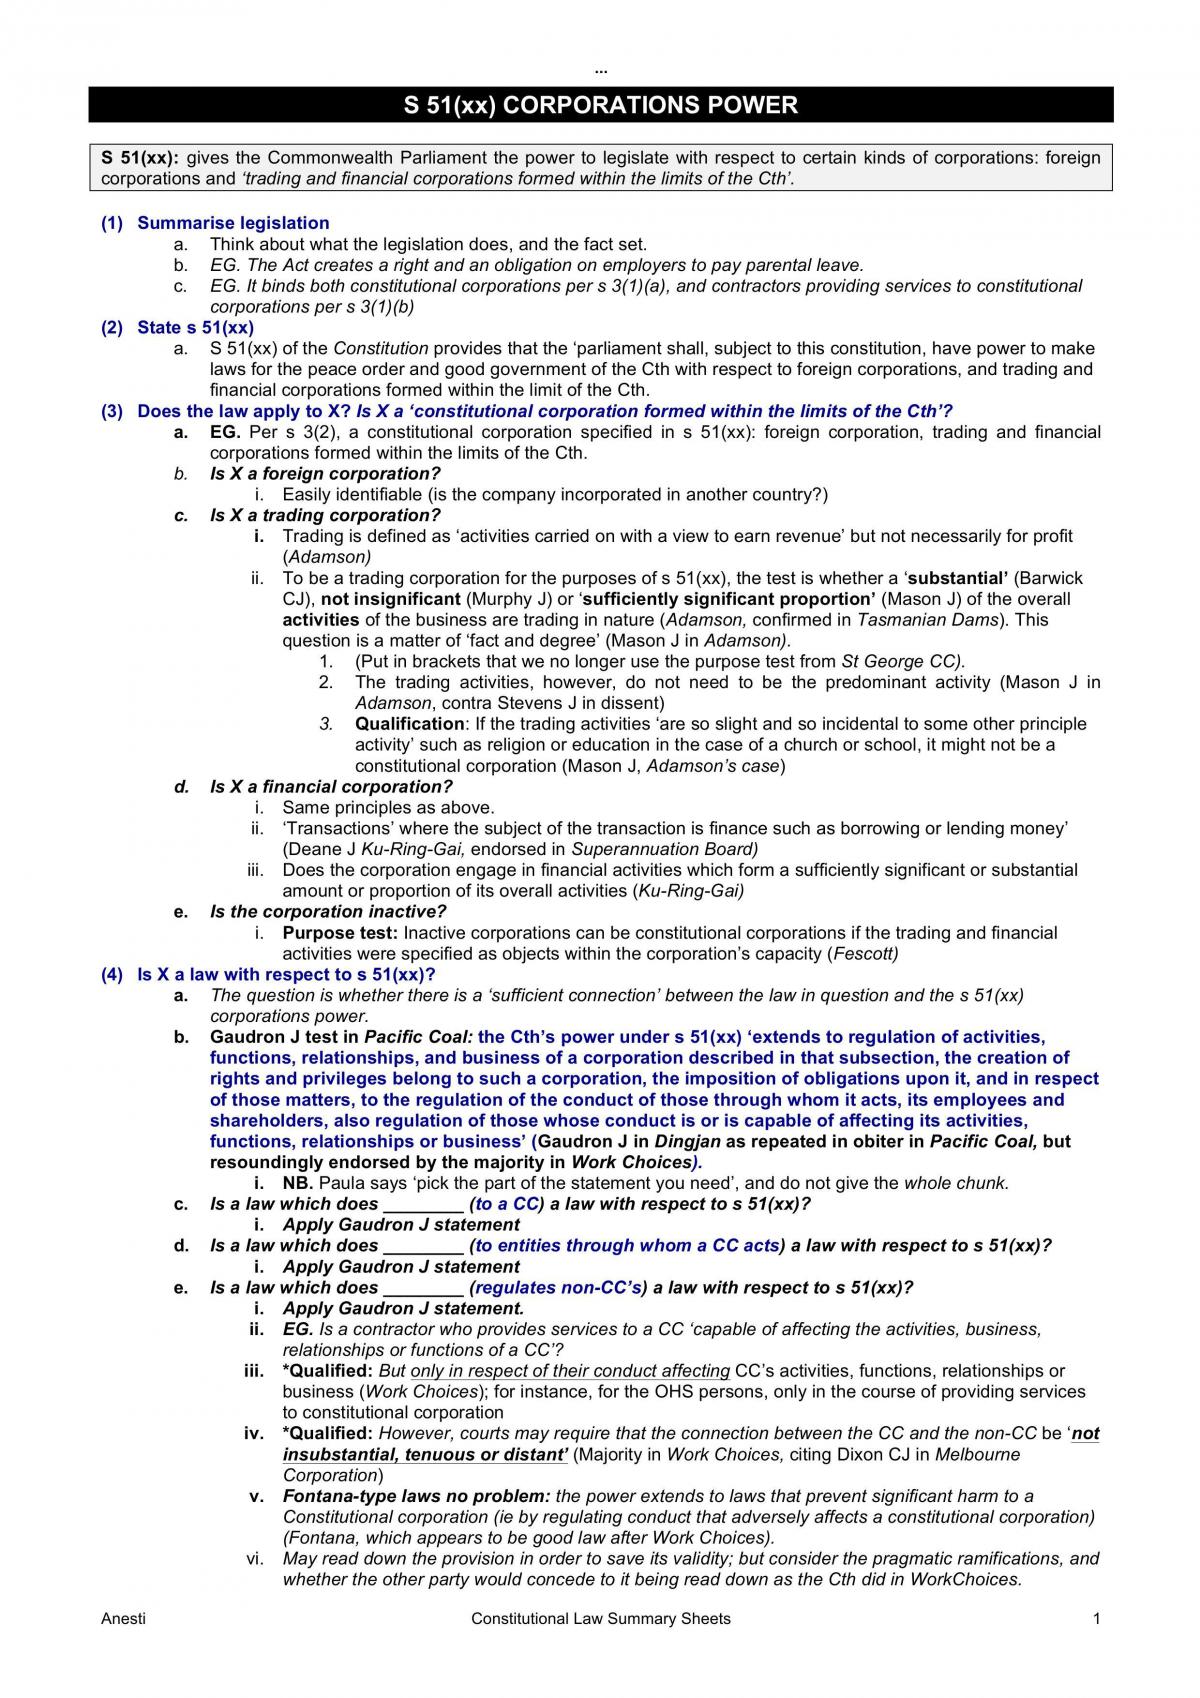 Constitutional Law Notes - Page 1